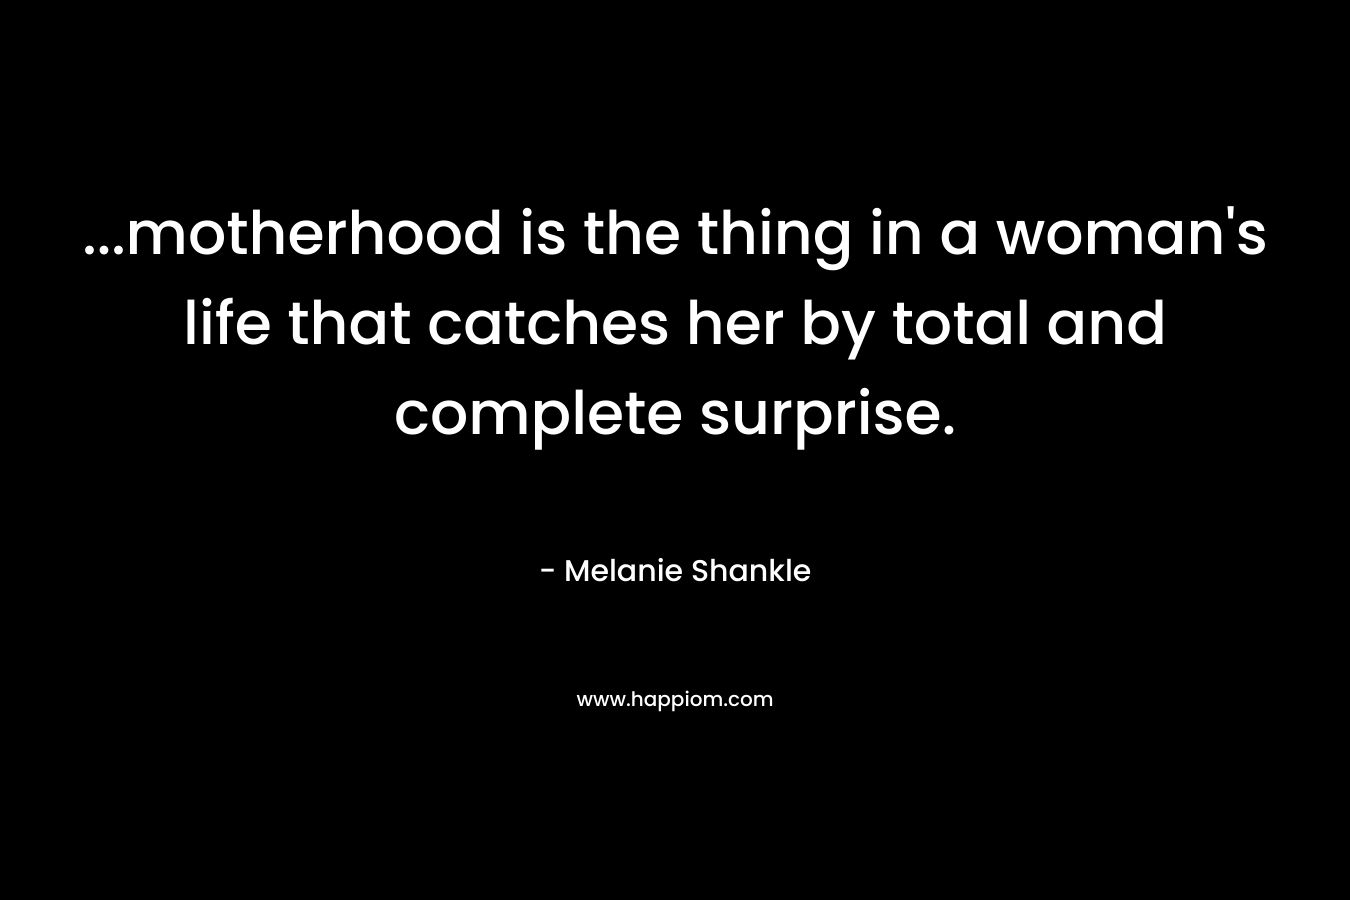 …motherhood is the thing in a woman’s life that catches her by total and complete surprise. – Melanie Shankle